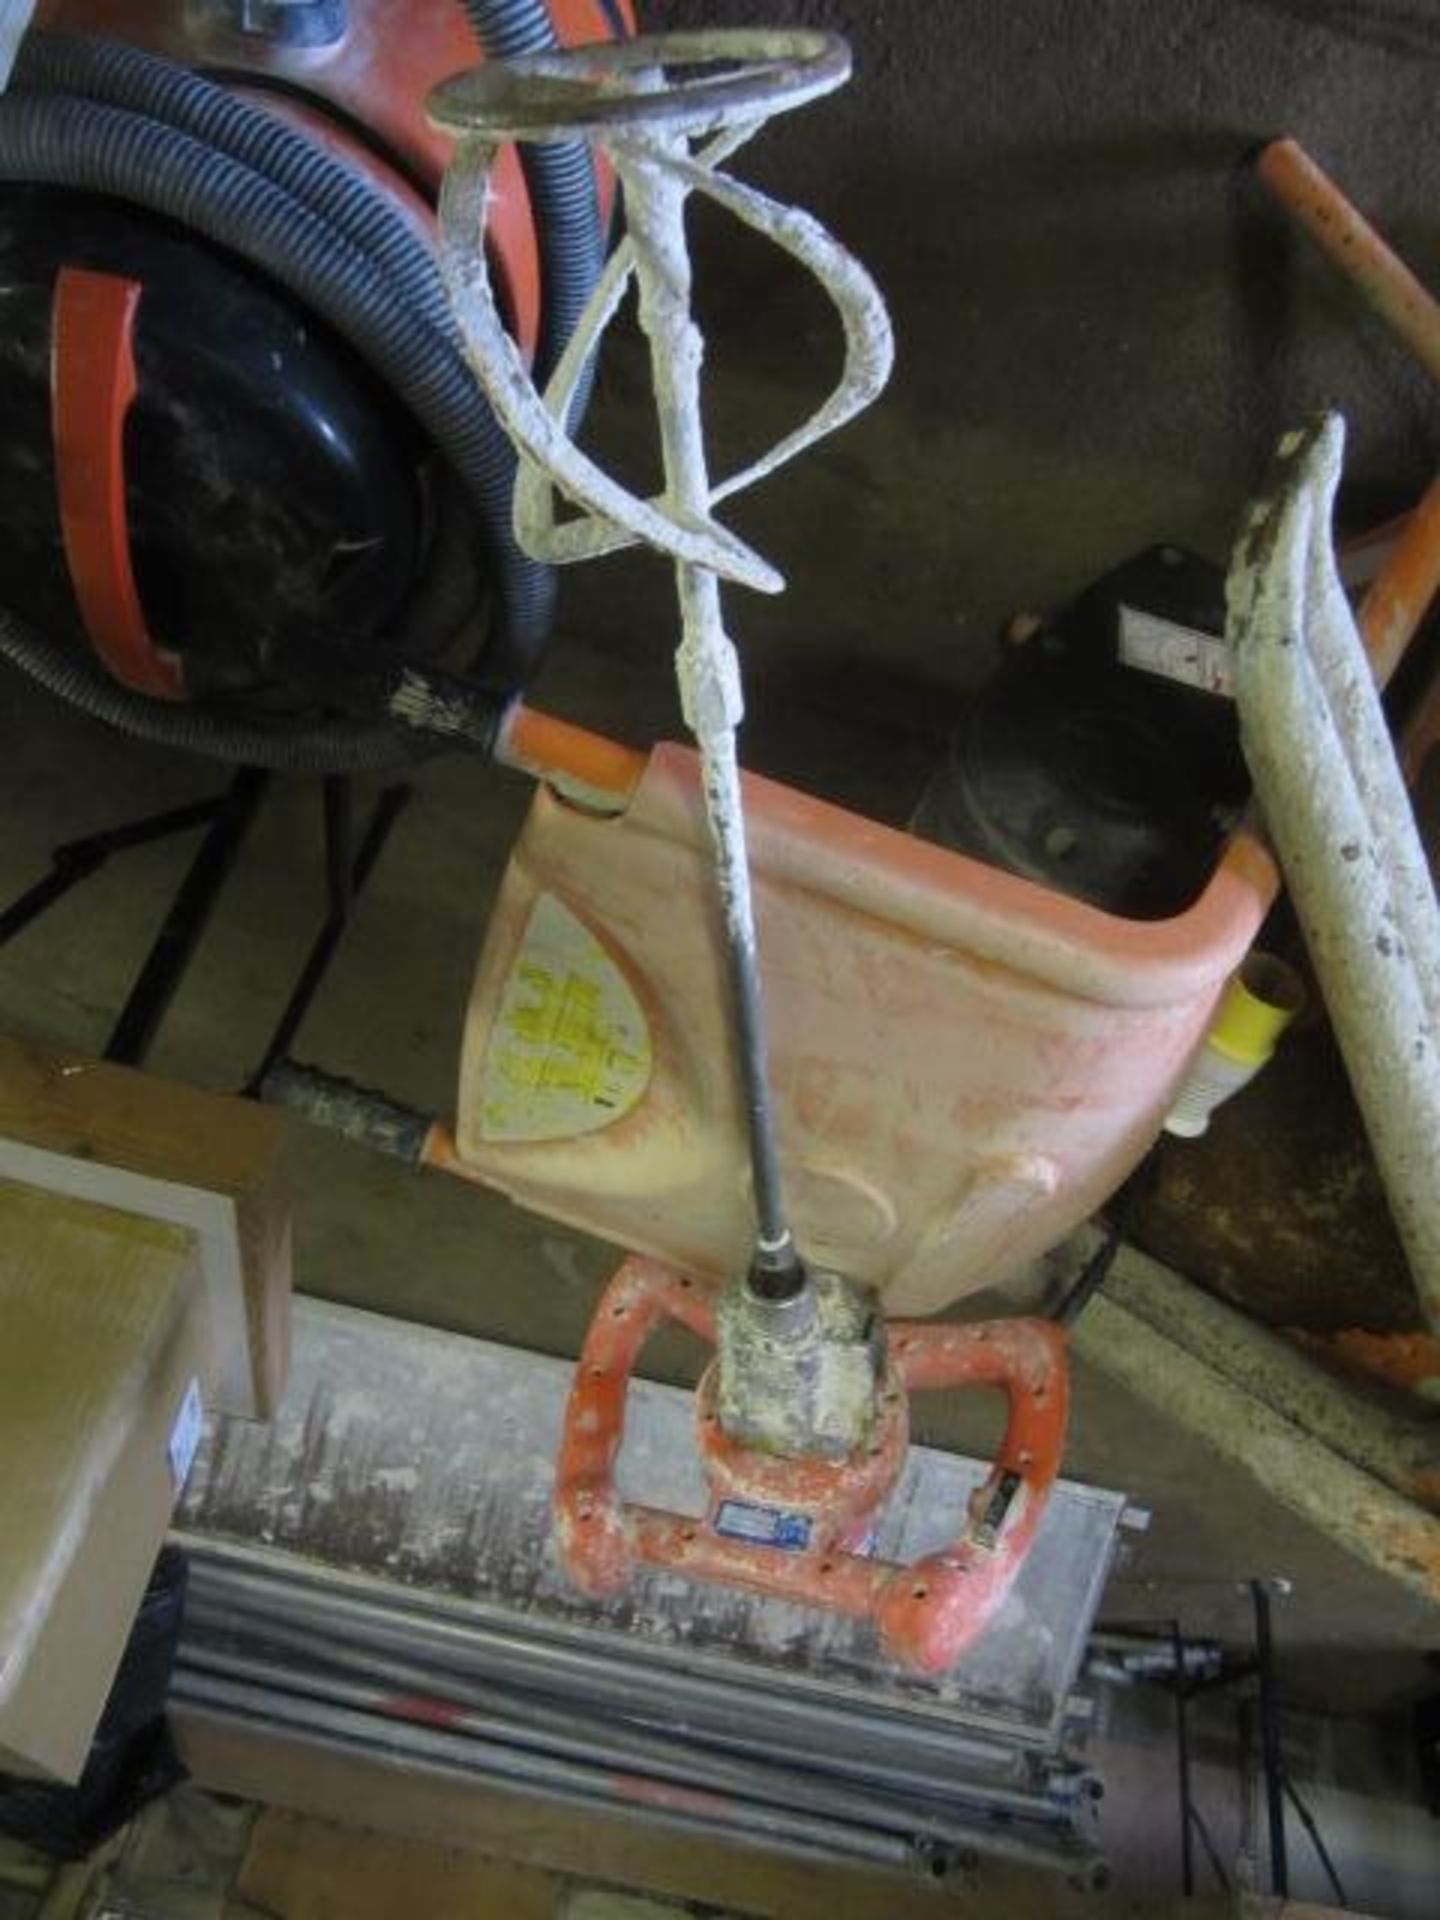 Vitrex paddle mixer, Cement mixer with stand (spares or repairs), assorted handtools including - Image 3 of 5